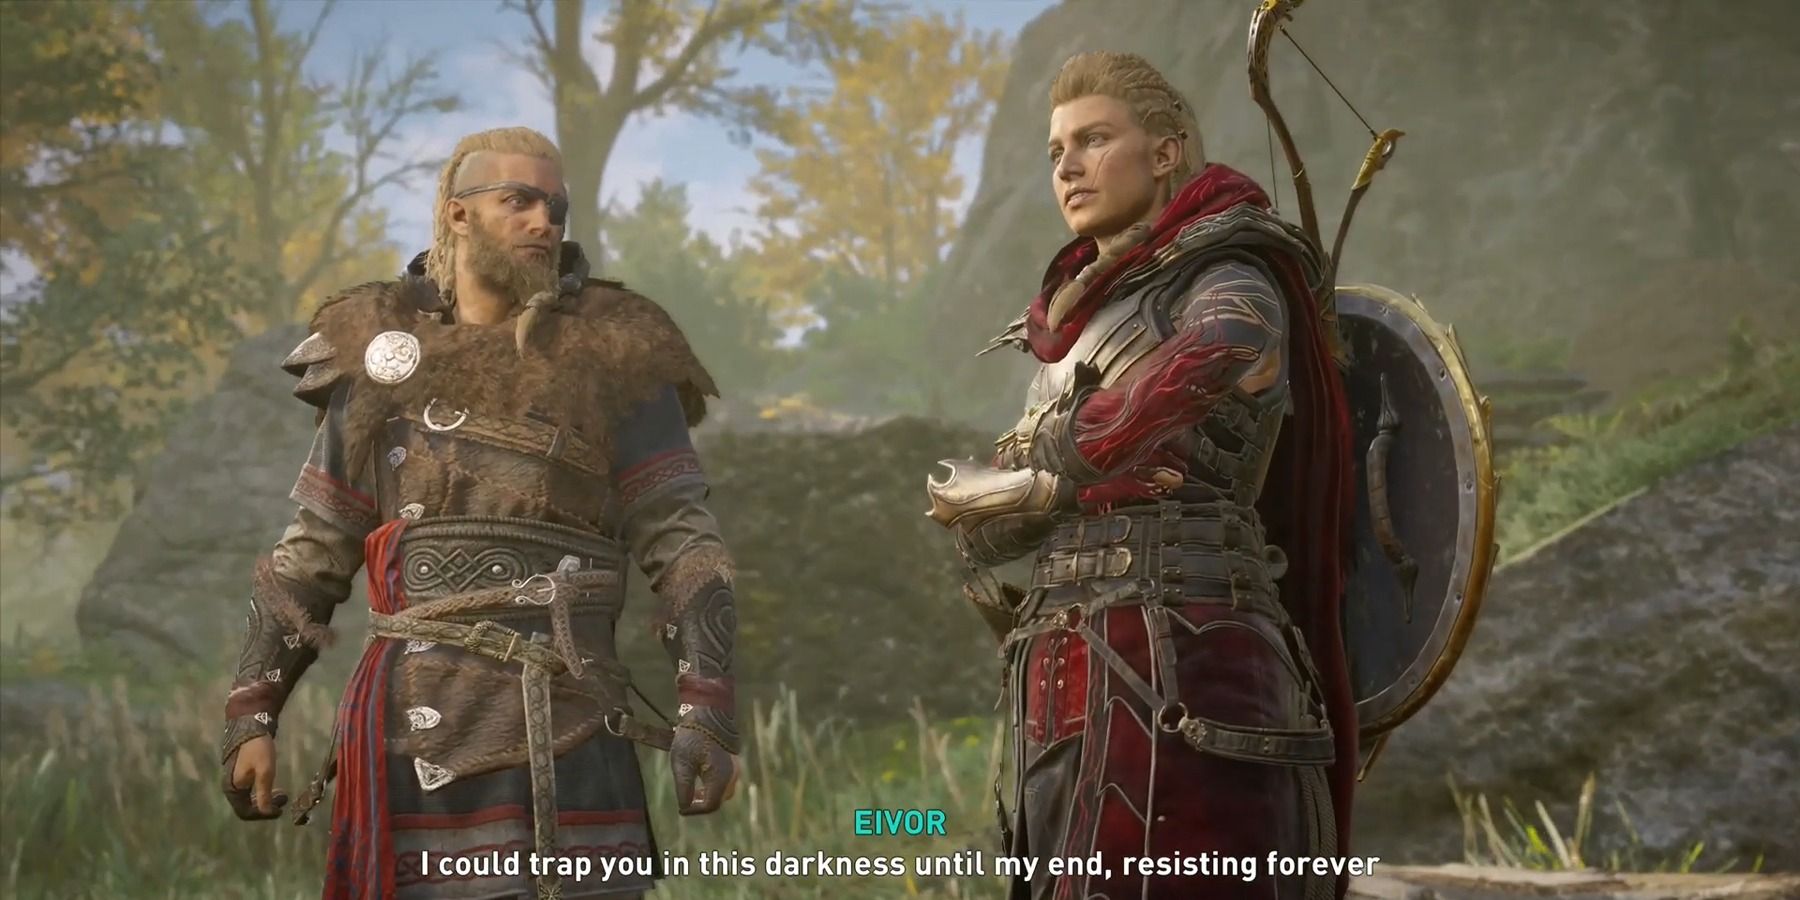 Odin and Eivor talking in The Last Chapter DLC in Assassin's Creed Valhalla